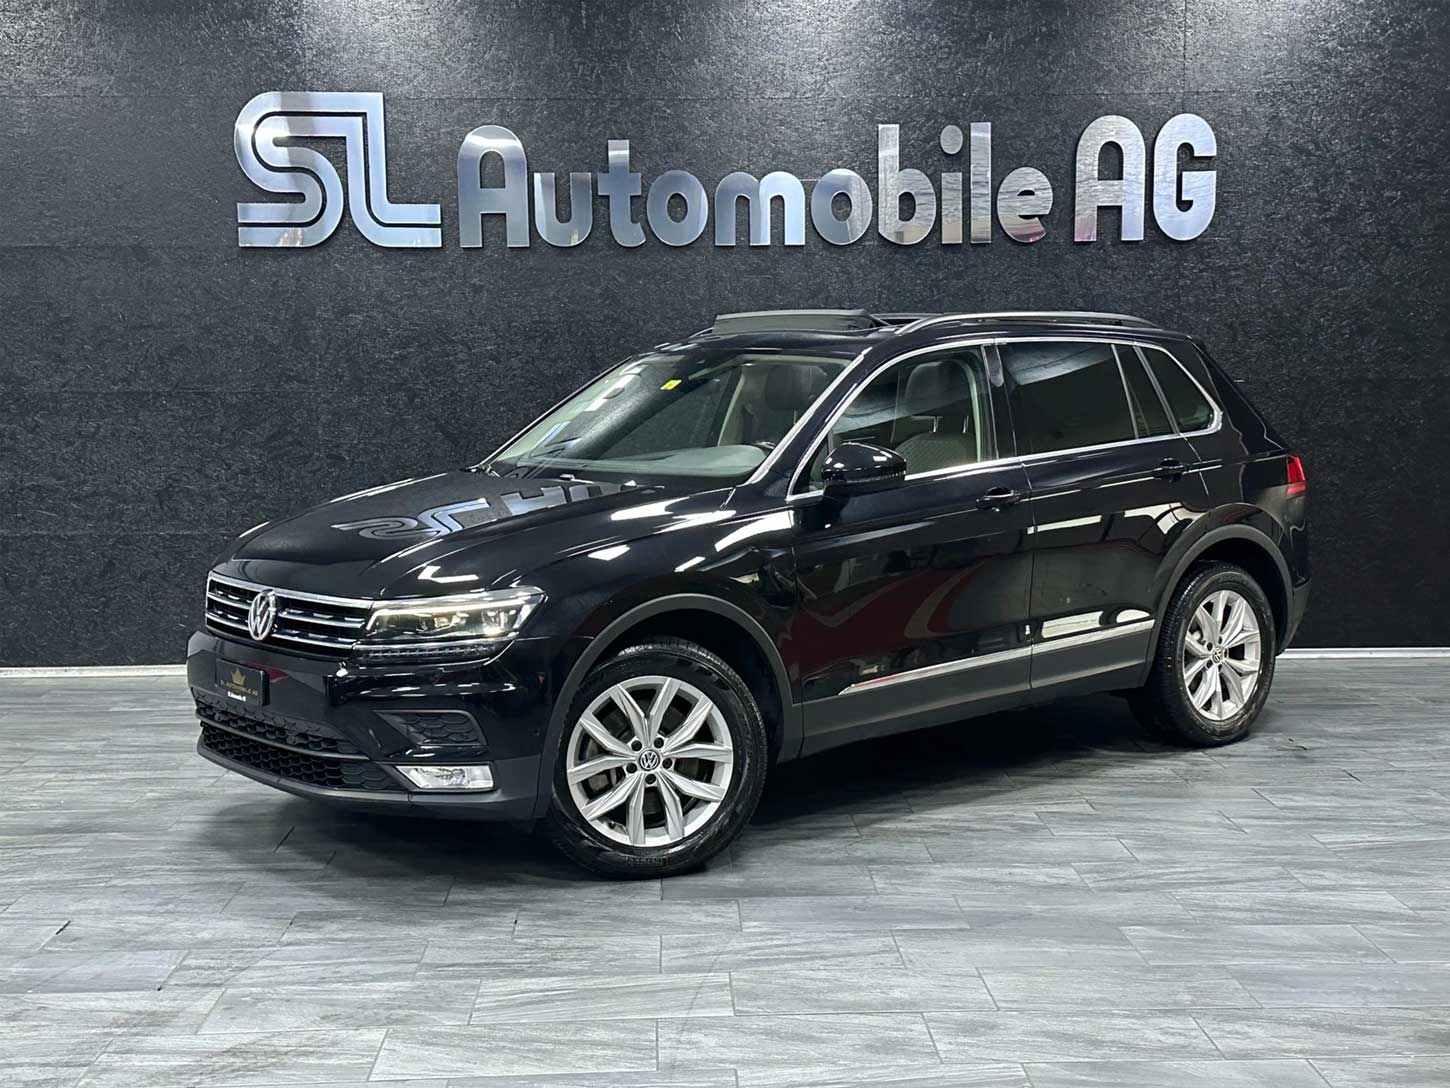 <a href="https://www.autoscout24.ch/de/d/vw-tiguan-20-tdi-scr-comfortline-4motion-dsg-11196635" style="color: white; text-decoration: none;" onmouseover="this.style.color='yellow'" onmouseout="this.style.color='white'">VW Tiguan 2.0 TDI SCR Comfort line 4Motion DSG</a>